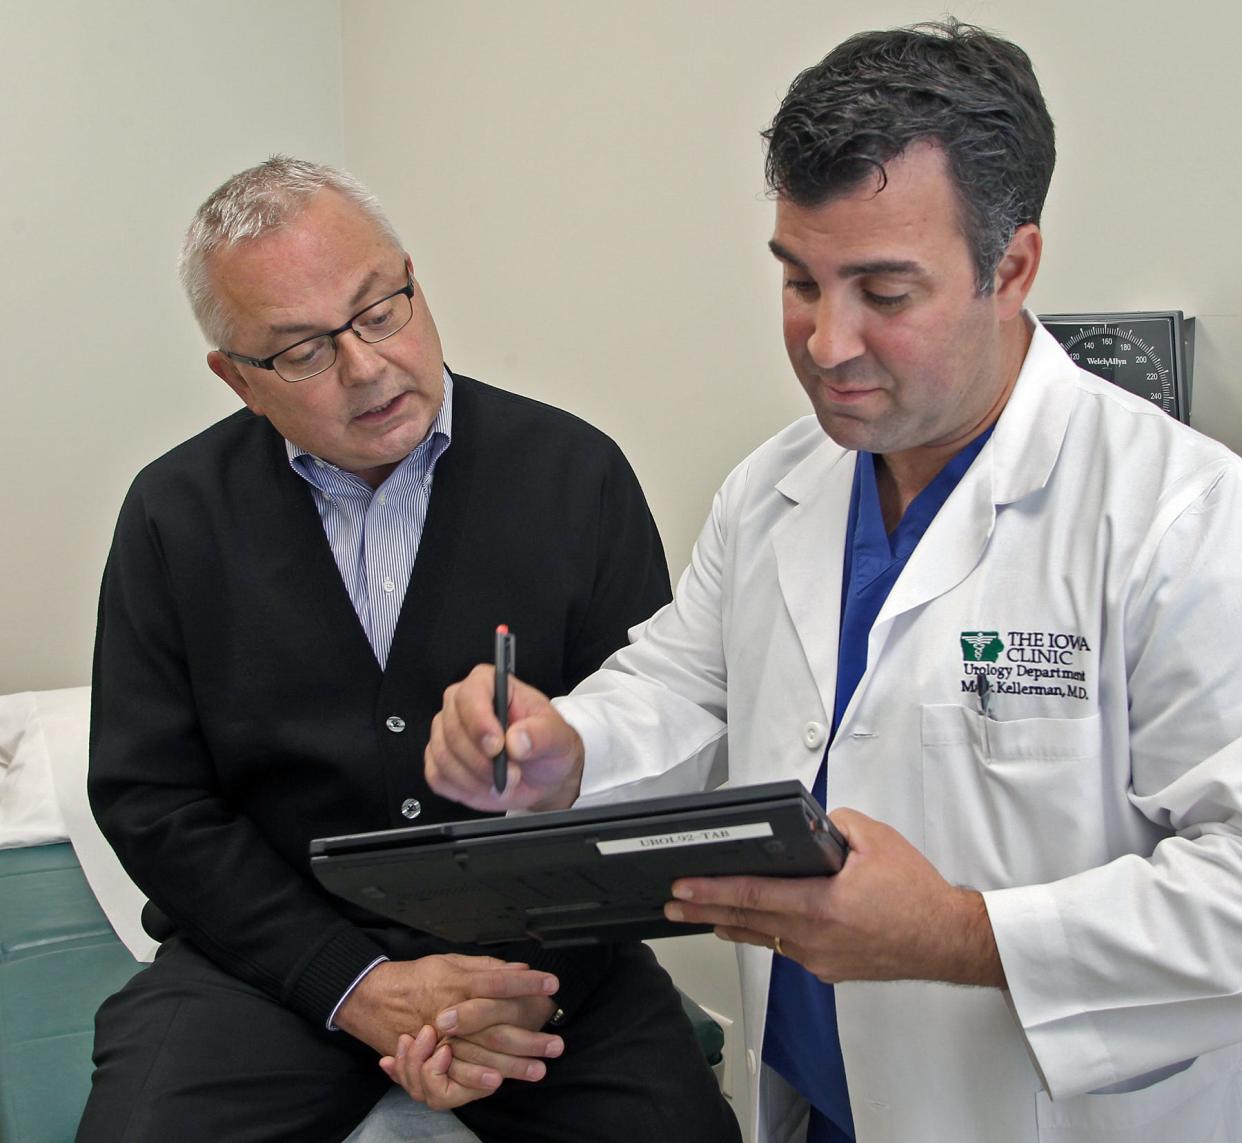 Iowa Clinic urologist Mark Kellerman, right, consults with prostate-cancer patient Jim Turner in 2012.  Kellerman is one of three Iowa Clinic urologists fired in September 2018 amid a dispute with the specialty practice.